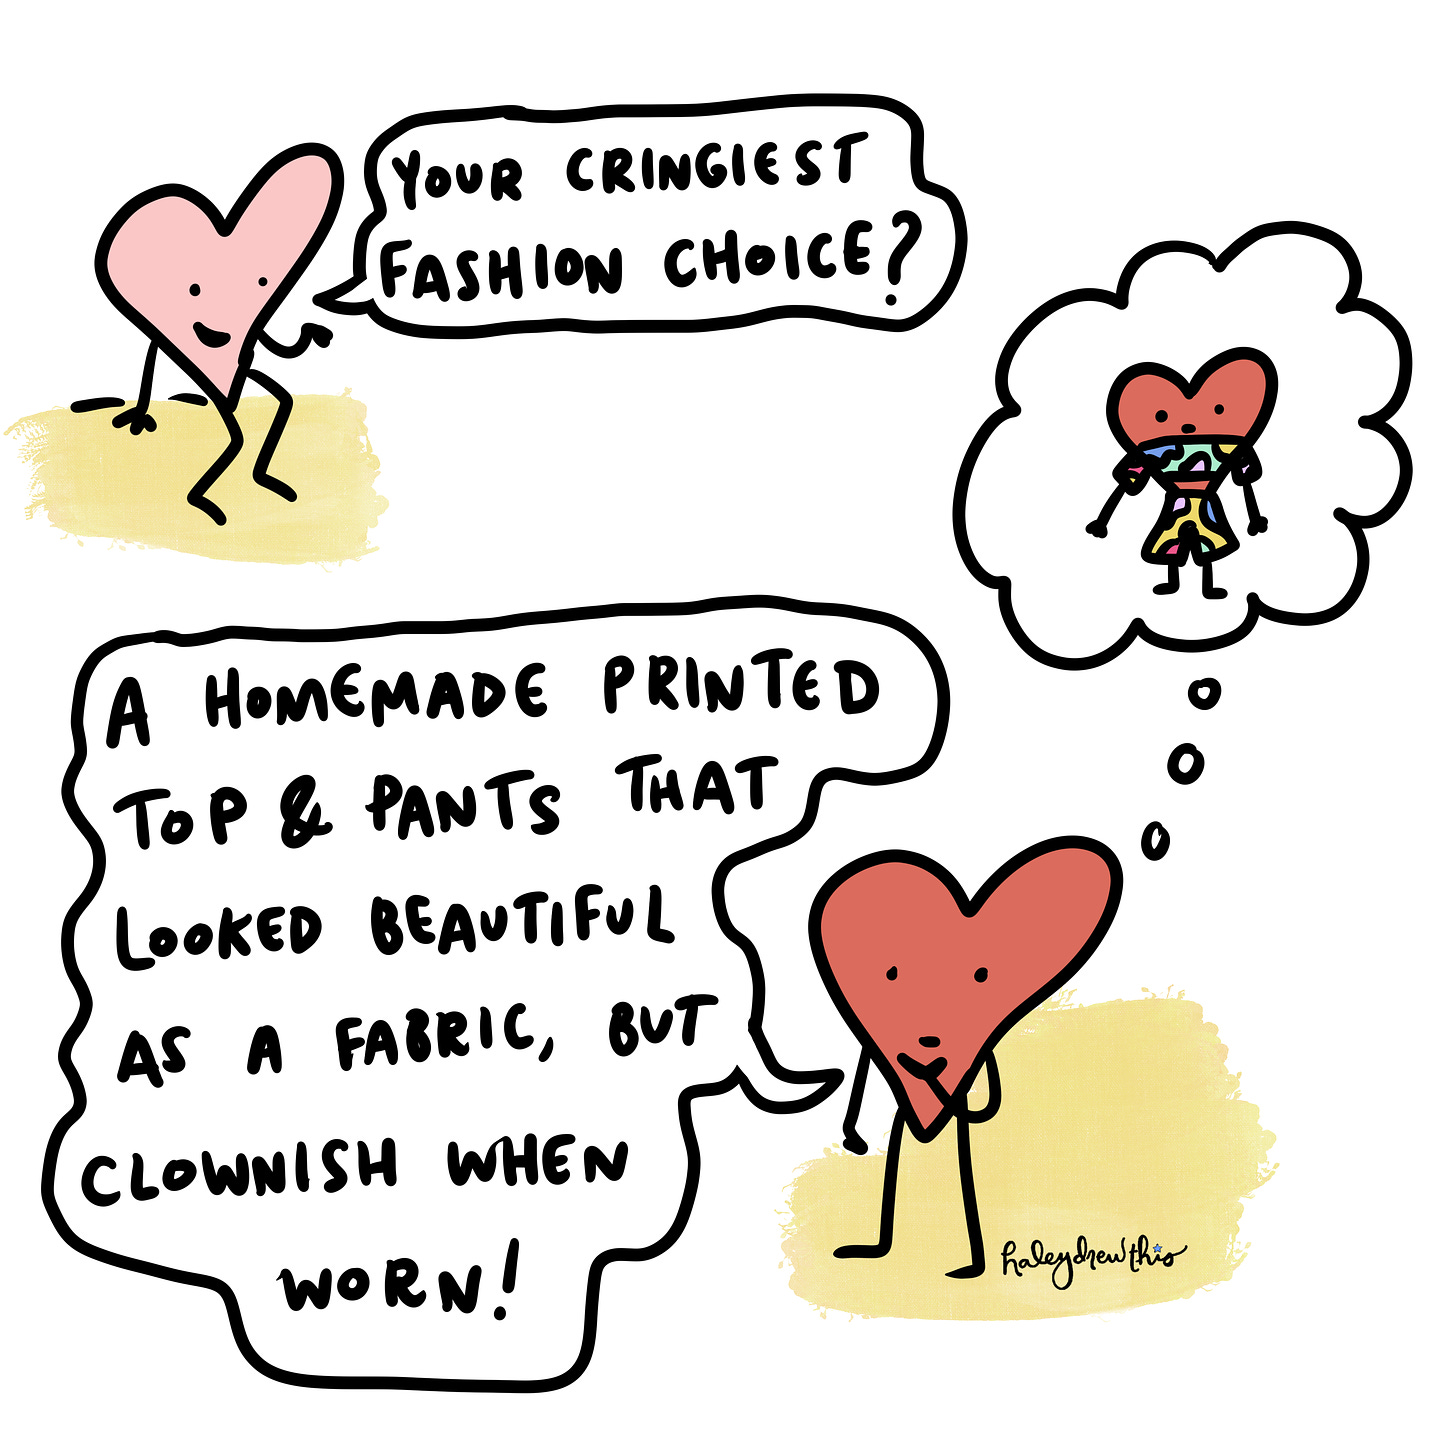 Comics reads: What is your cringiest fashion choice? A homemade printed top and pants that looked beautiful as a fabric but was too much when worn together so it looked clownish. 